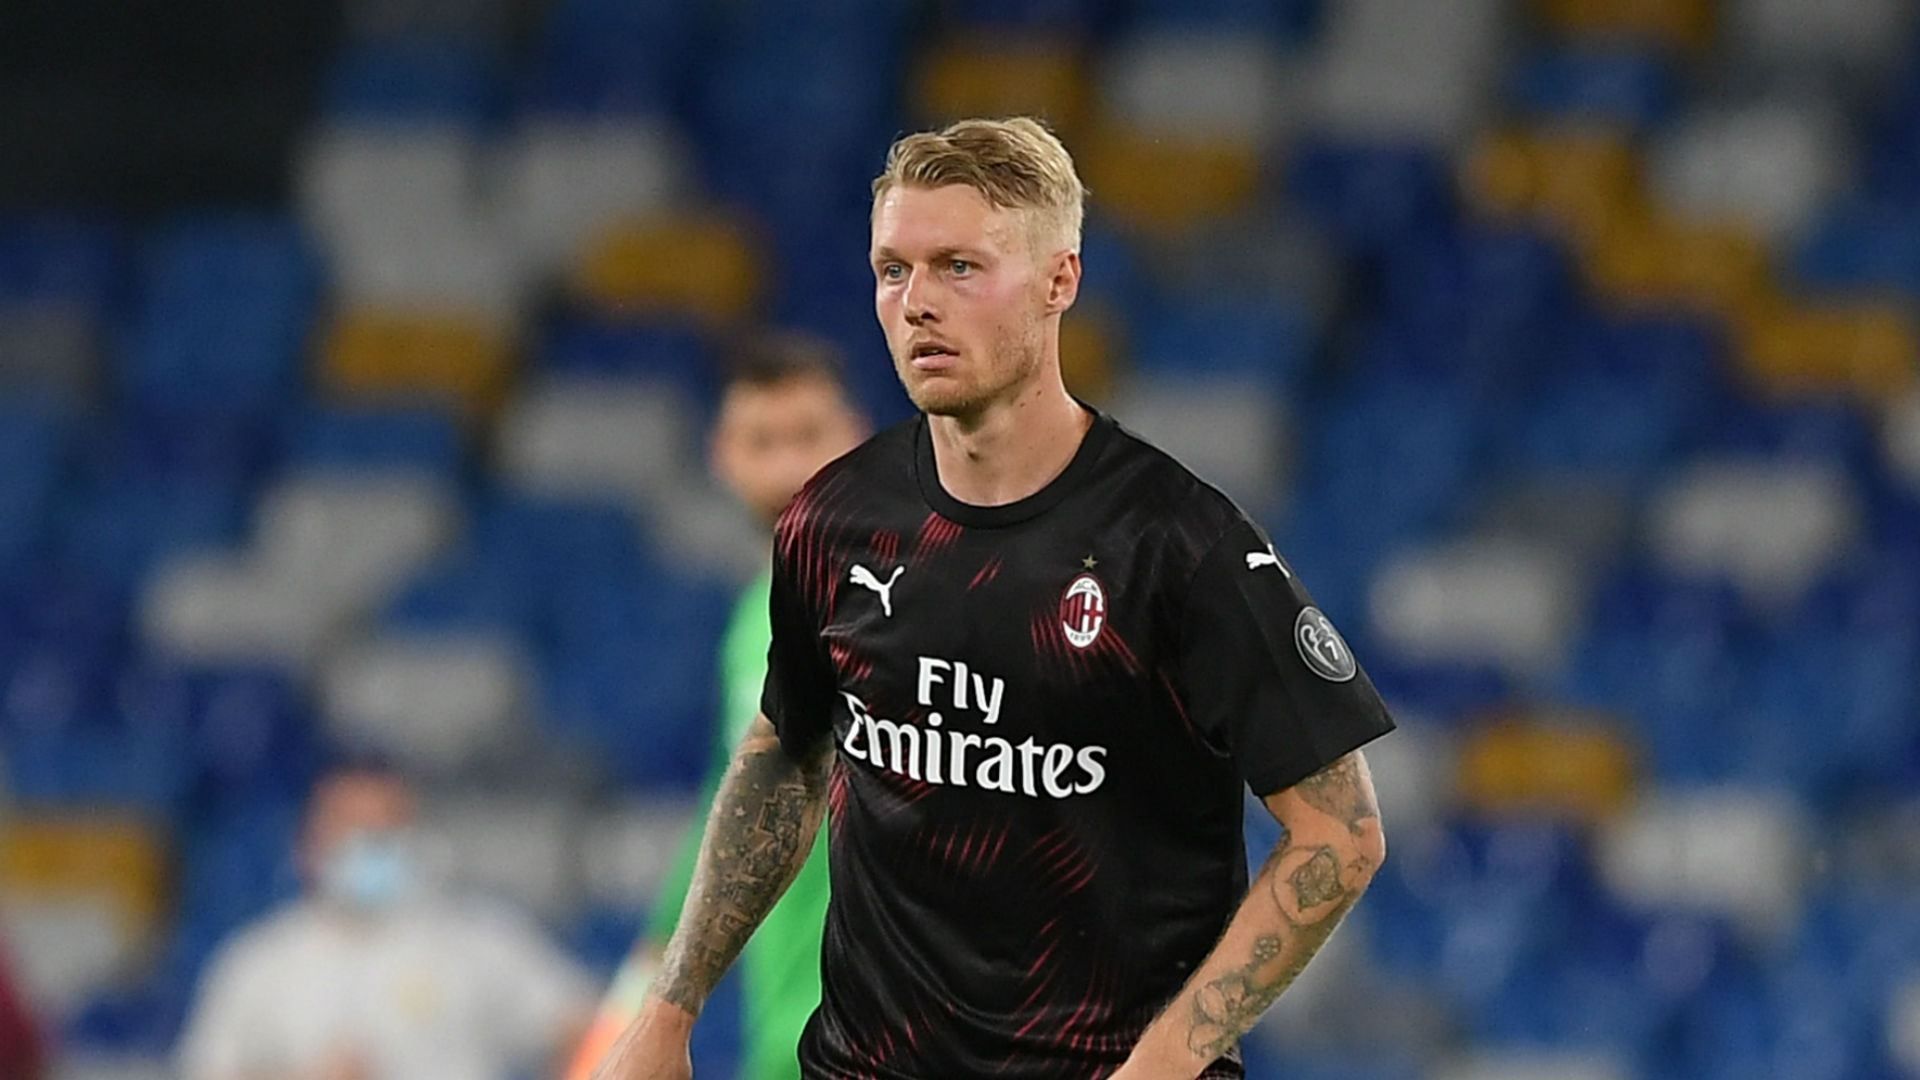 Having impressed at San Siro since arriving on loan in January, Simon Kjaer has joined Milan permanently for a reported €3.5m.